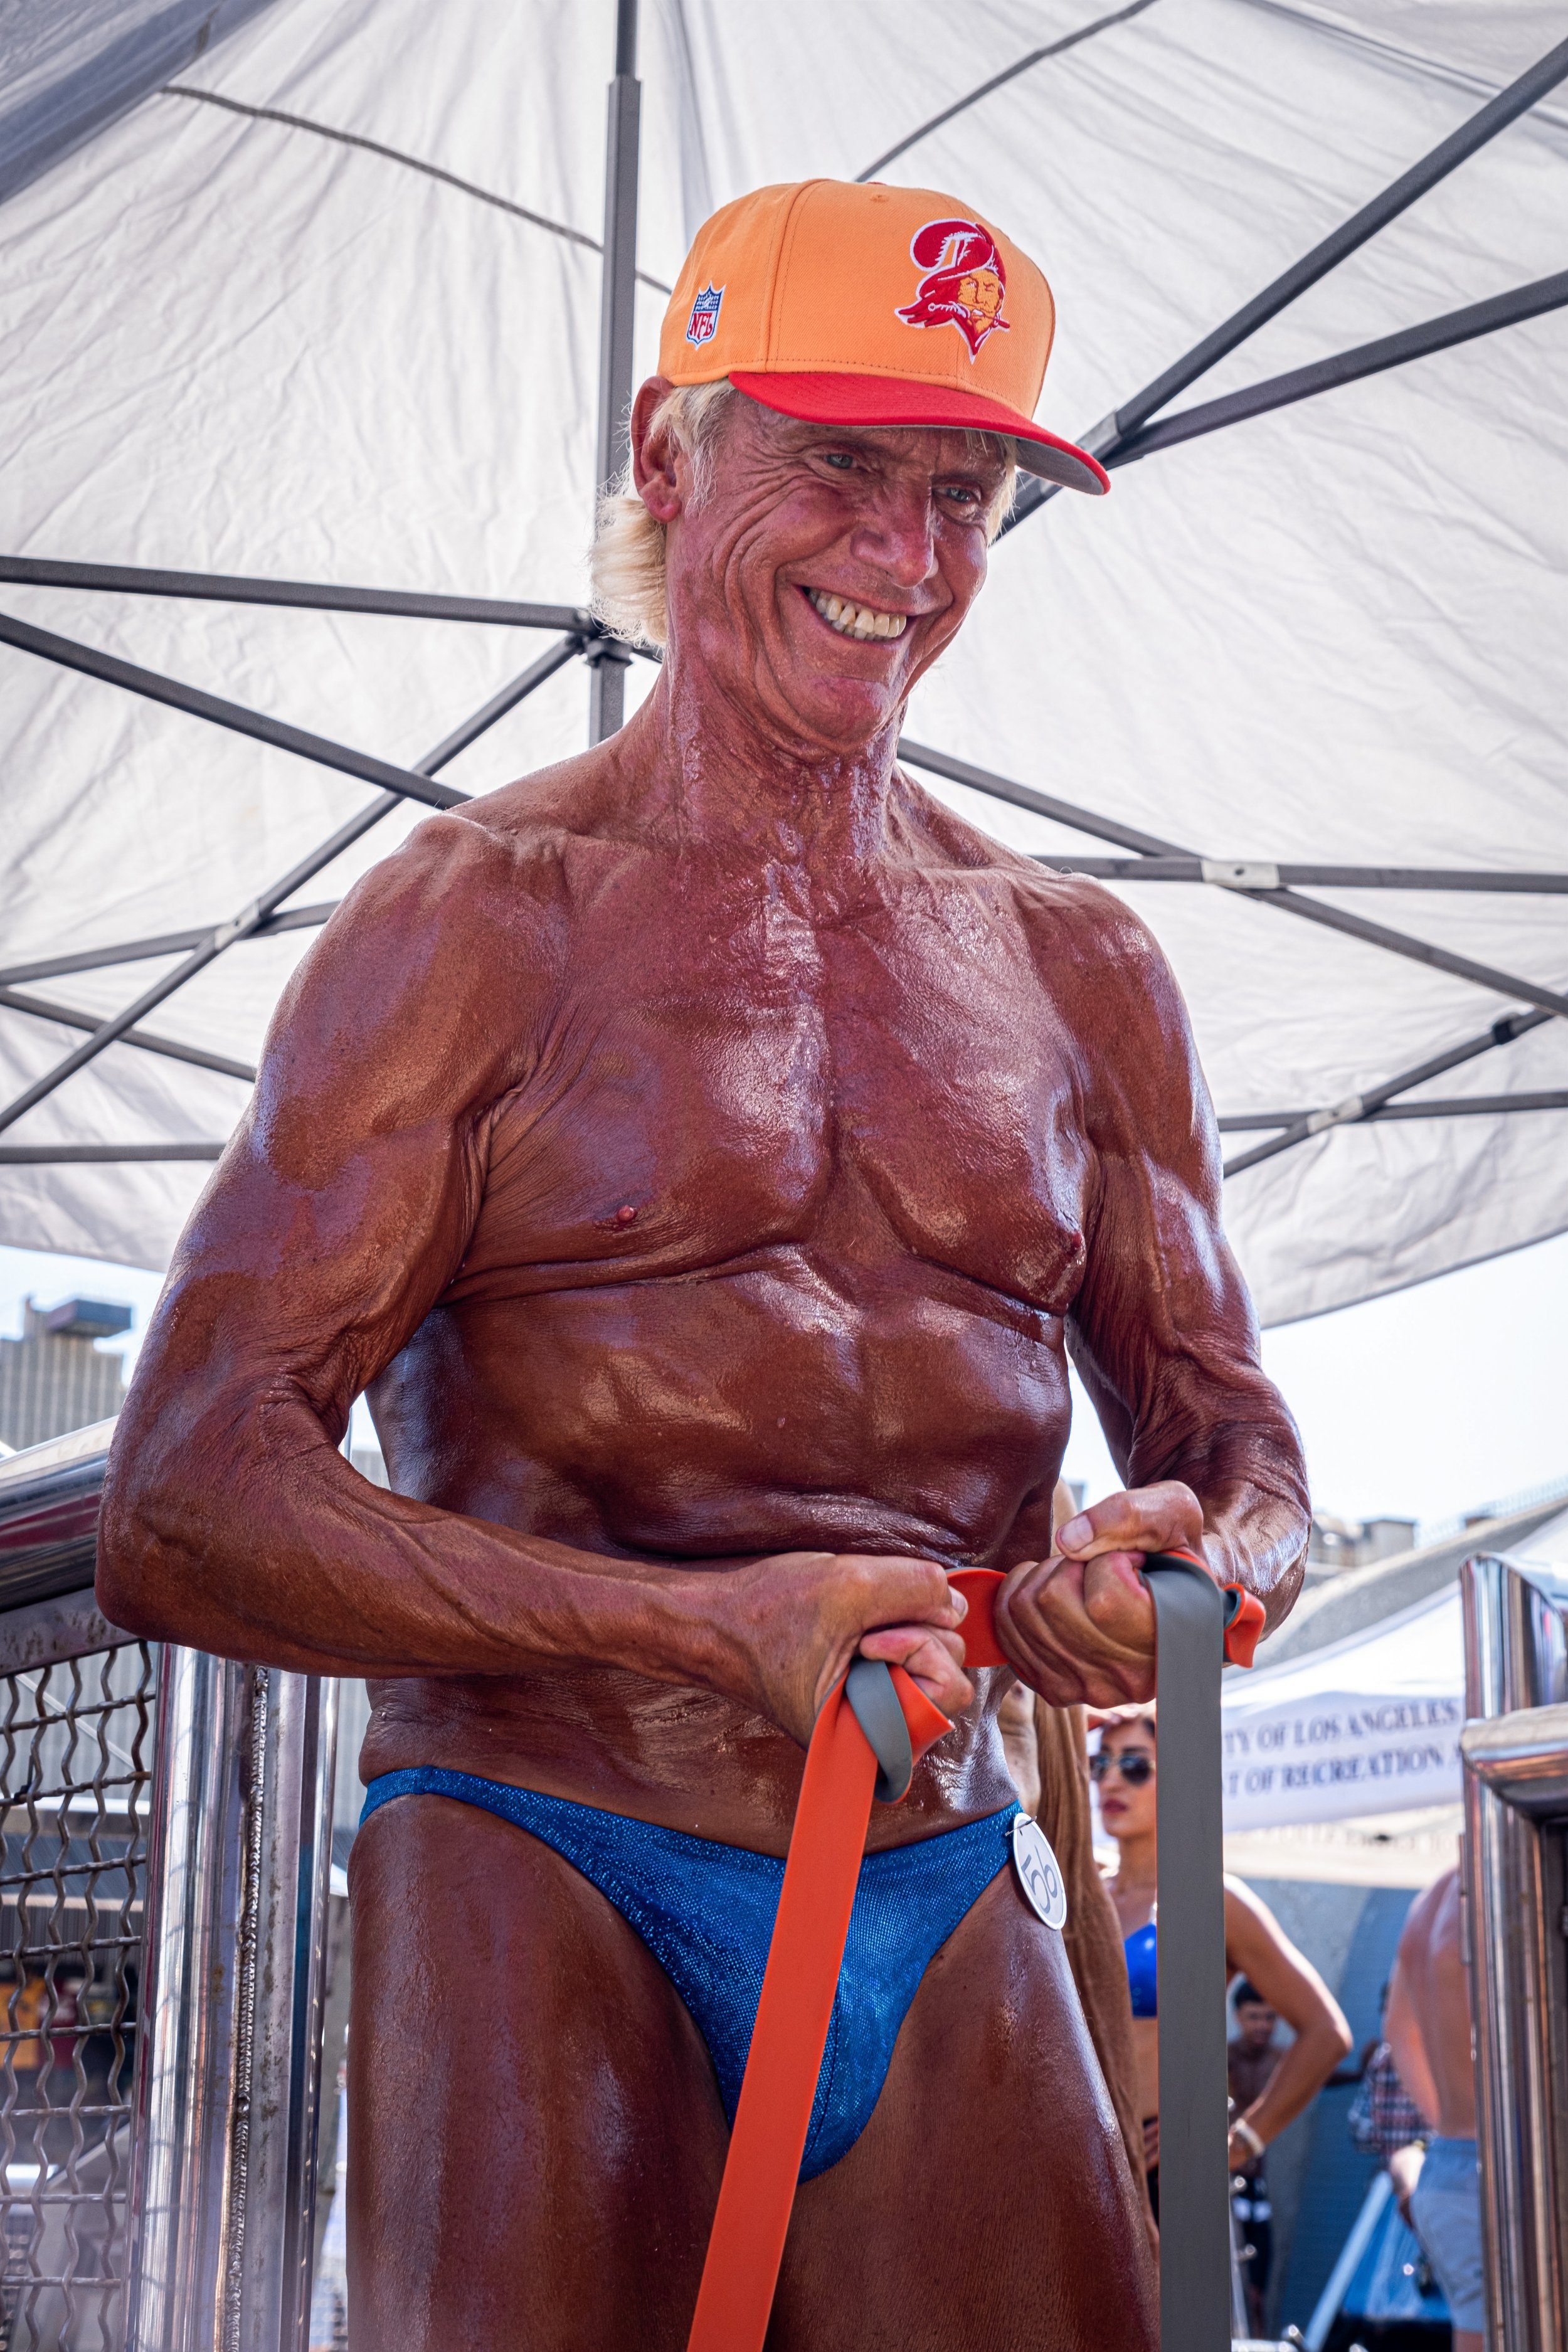  JR Jenkins shares that he is glad to be able to compete again, now that The Muscle Beach Championship includes an Over 70 category. Venice Beach Recreation Center, in Venice, Calif. on Labor Day, Monday, September 5, 2022. (Anna Sophia Moltke | The 